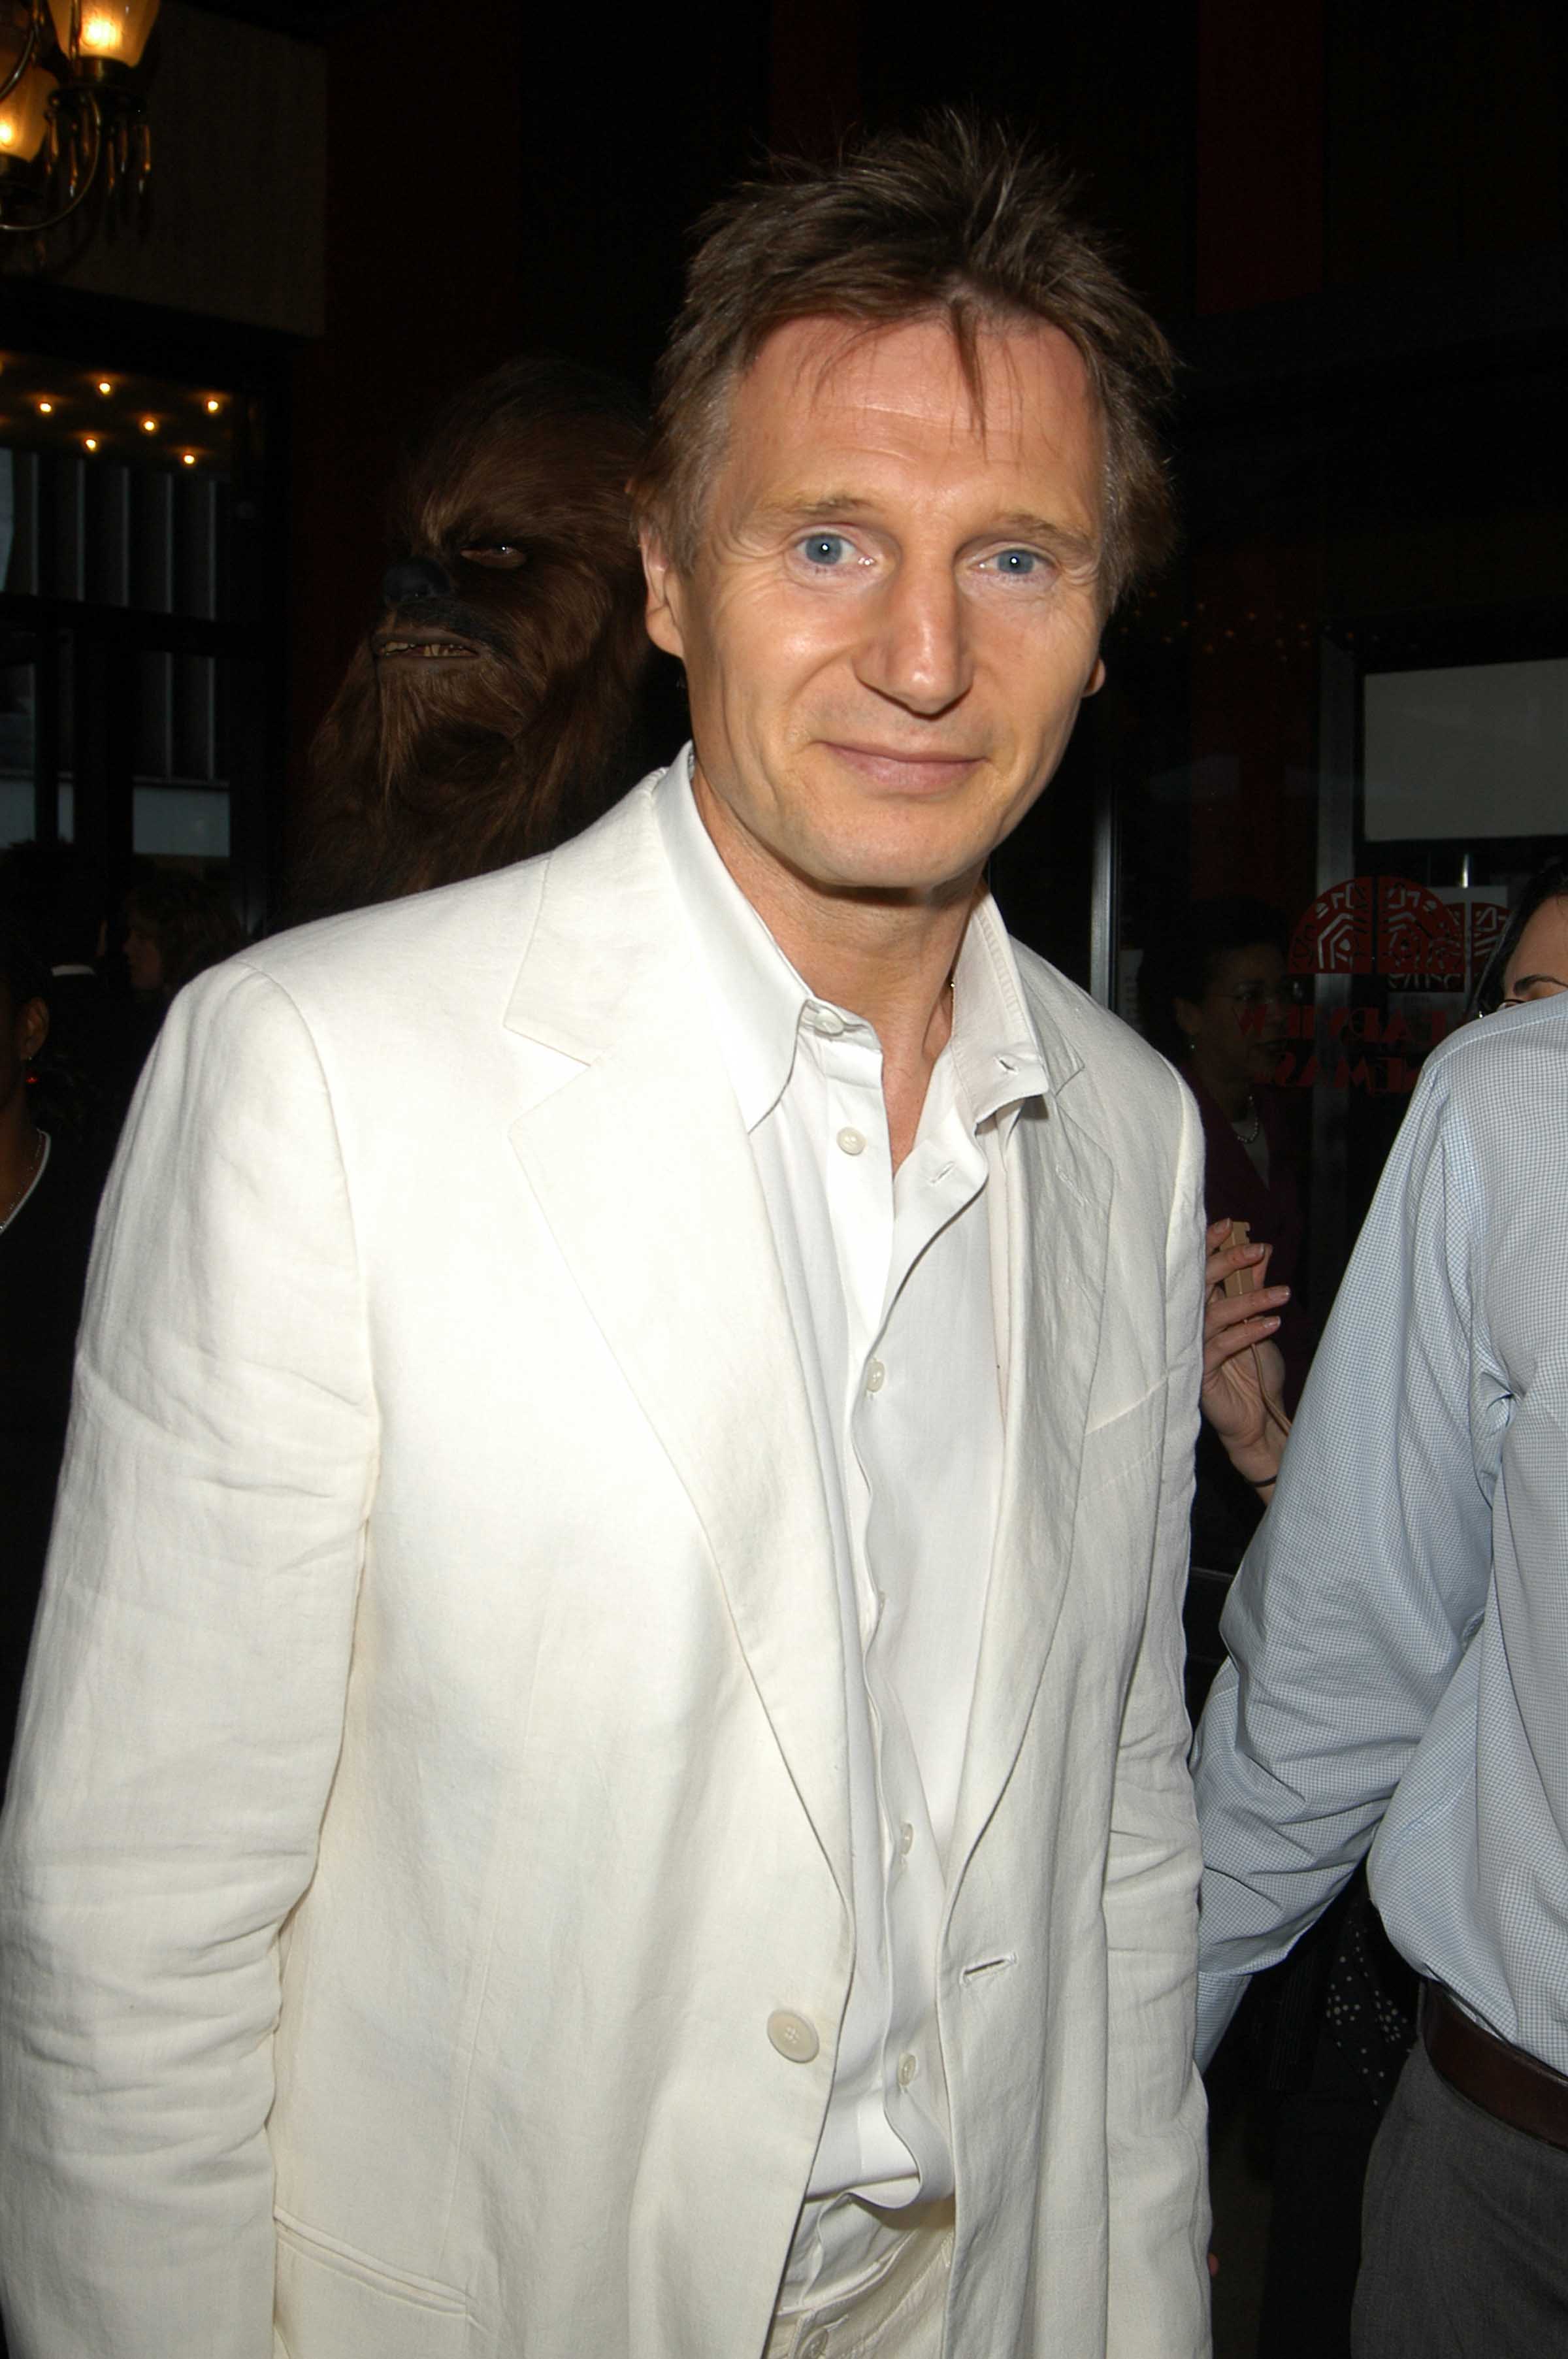 Liam Neeson in New York in 2005 | Source: Getty Images